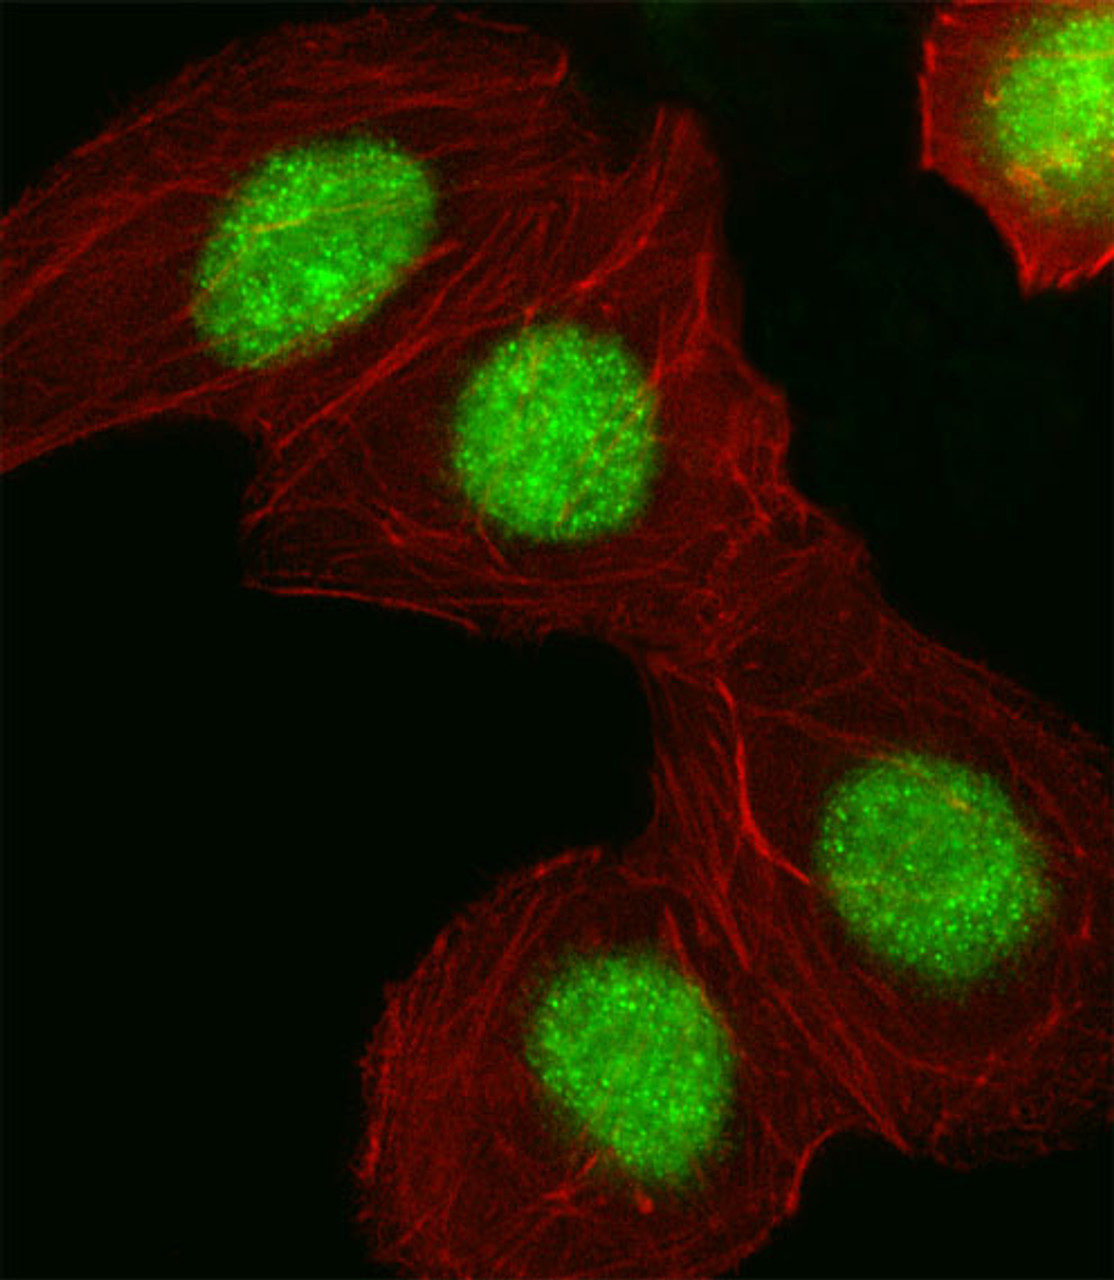 Fluorescent image of A549 cell stained with HMGA1 Antibody .A549 cells were fixed with 4% PFA (20 min) , permeabilized with Triton X-100 (0.1%, 10 min) , then incubated with HMGA1 primary antibody (1:25) . For secondary antibody, Alexa Fluor 488 conjugated donkey anti-rabbit antibody (green) was used (1:400) .Cytoplasmic actin was counterstained with Alexa Fluor 555 (red) conjugated Phalloidin (7units/ml) .HMGA1 immunoreactivity is localized to Nucleus significantly.